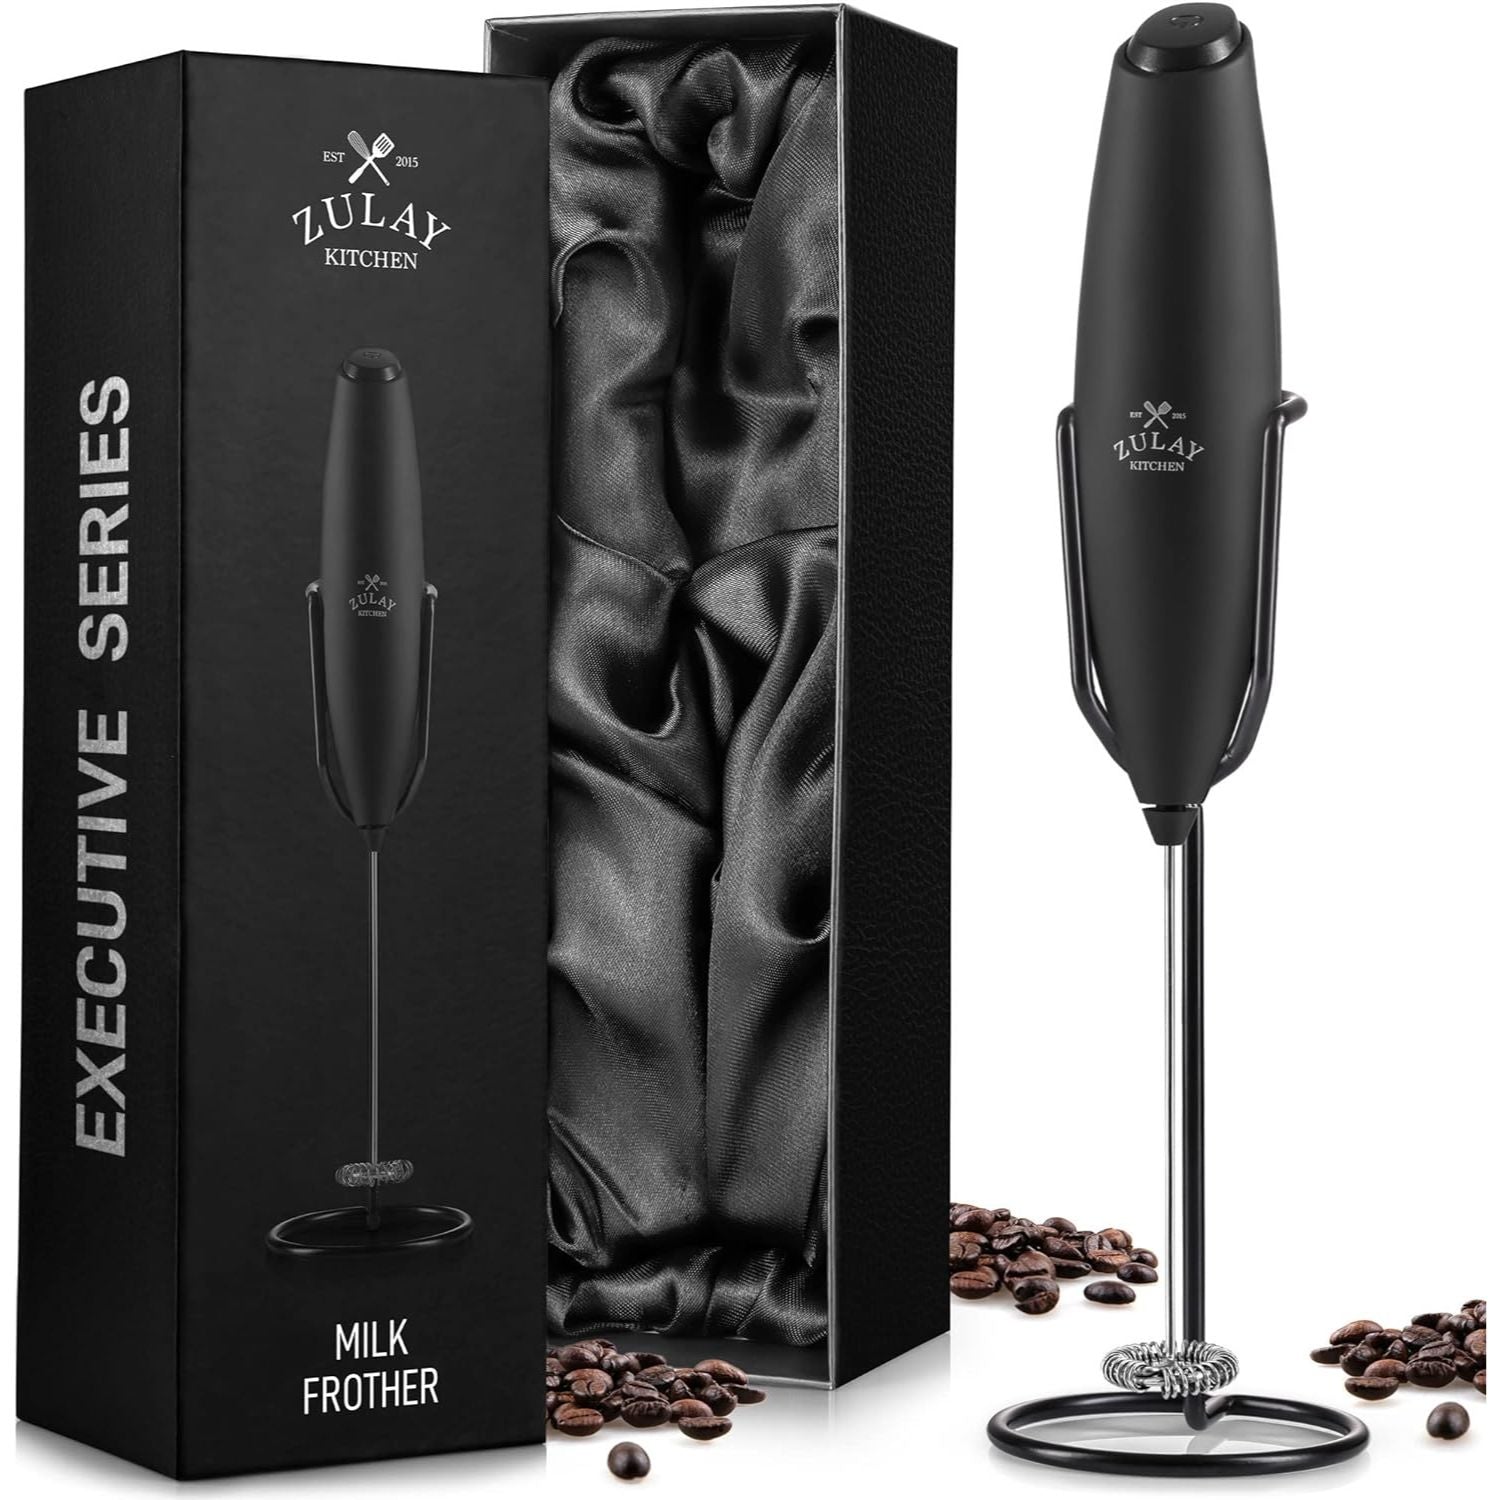 Executive Series Premium Milk Frother by Zulay Kitchen